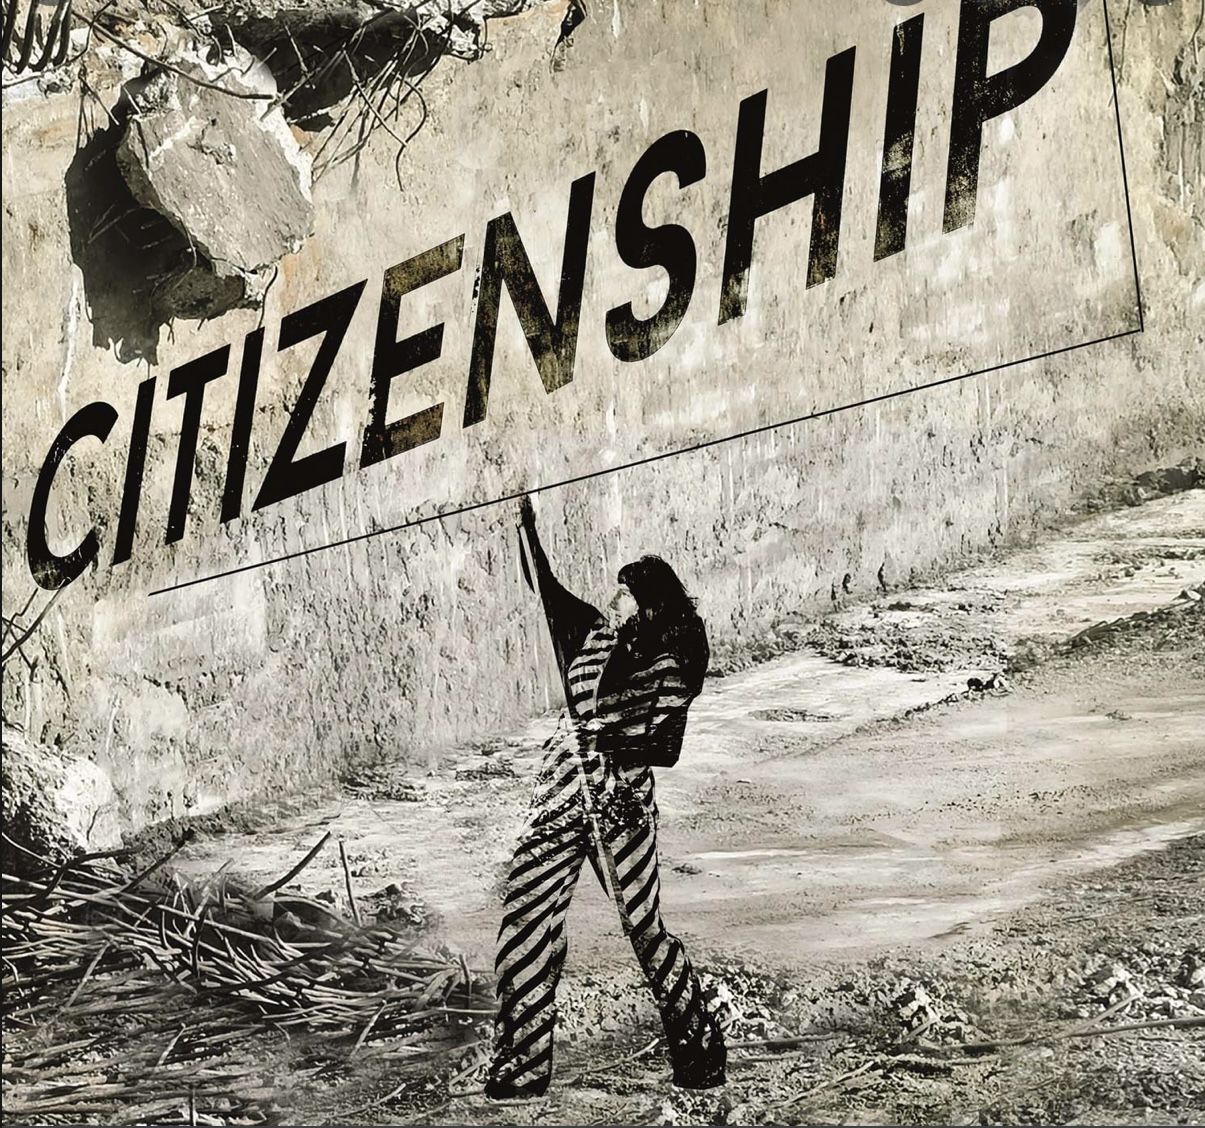 “Acts of Citizenship”